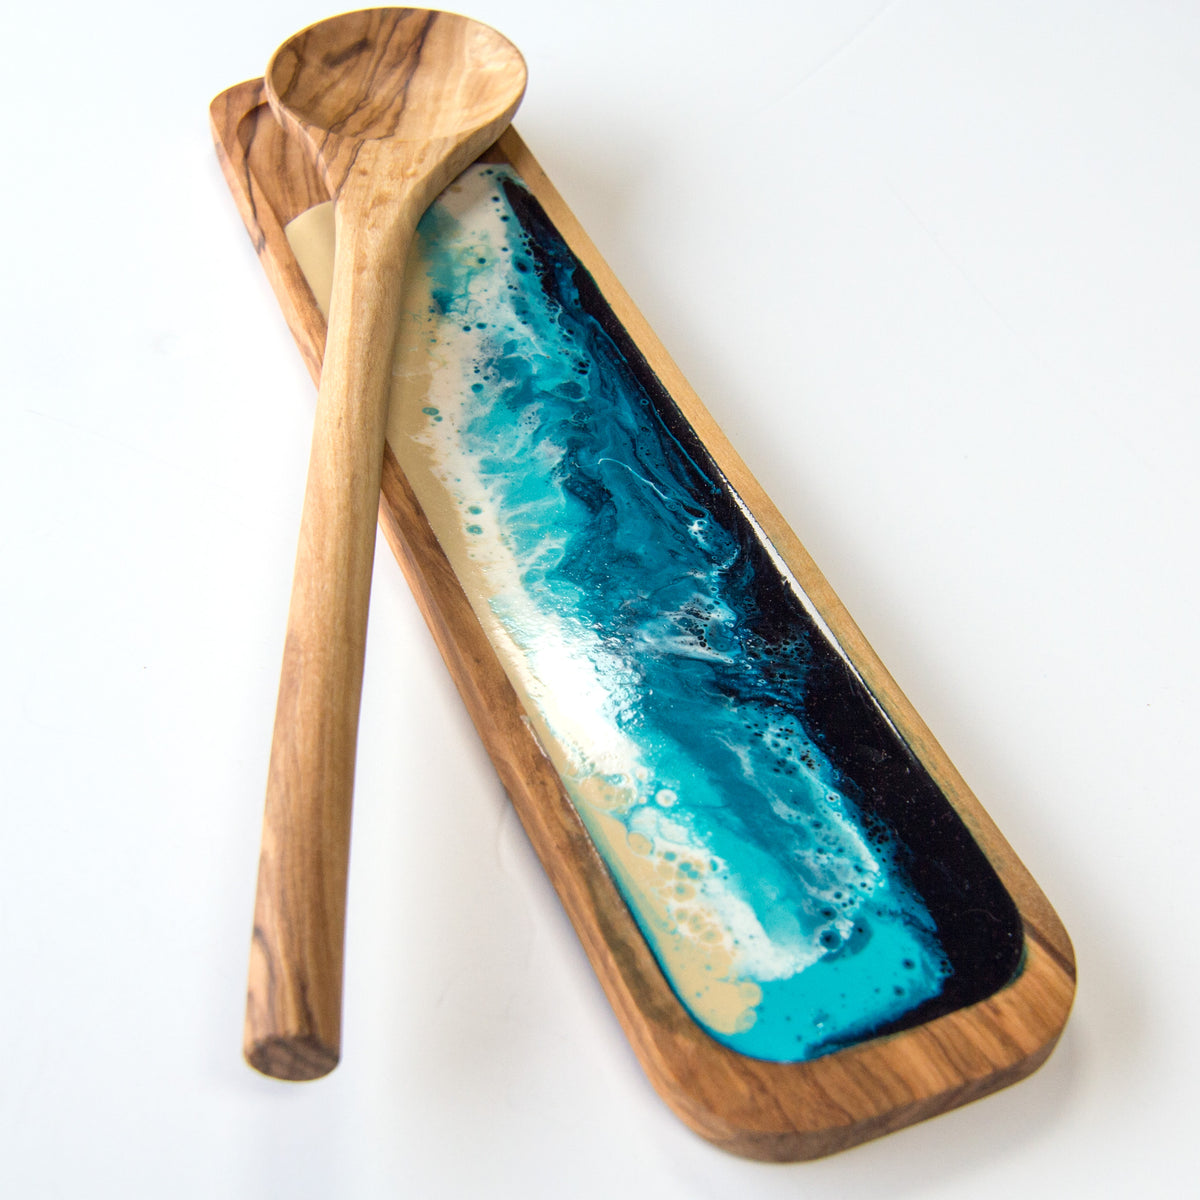 Ocean Design Olive Wood Spoon Rest and Spoon